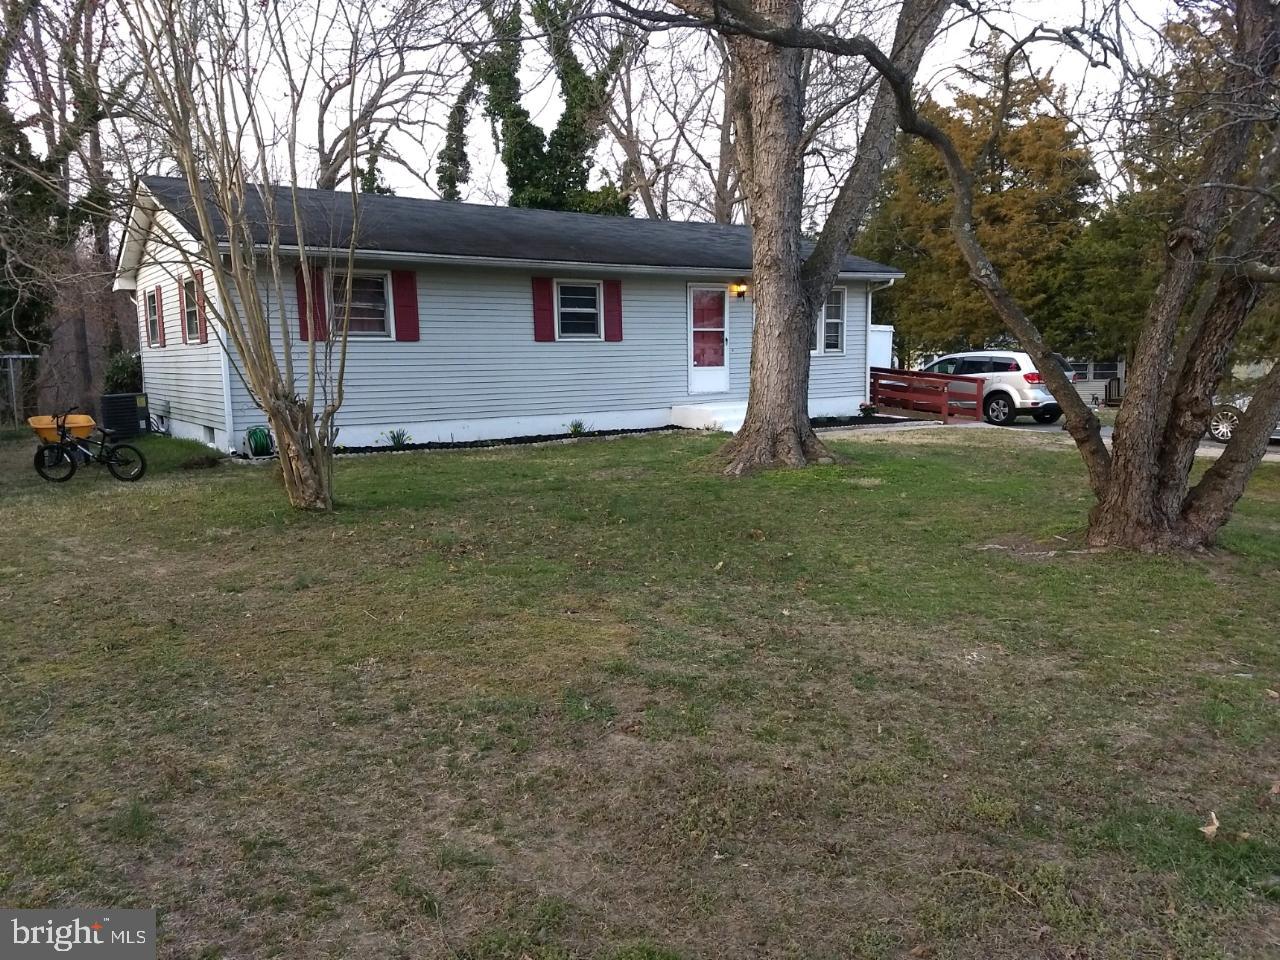 a front view of house with yard and trees